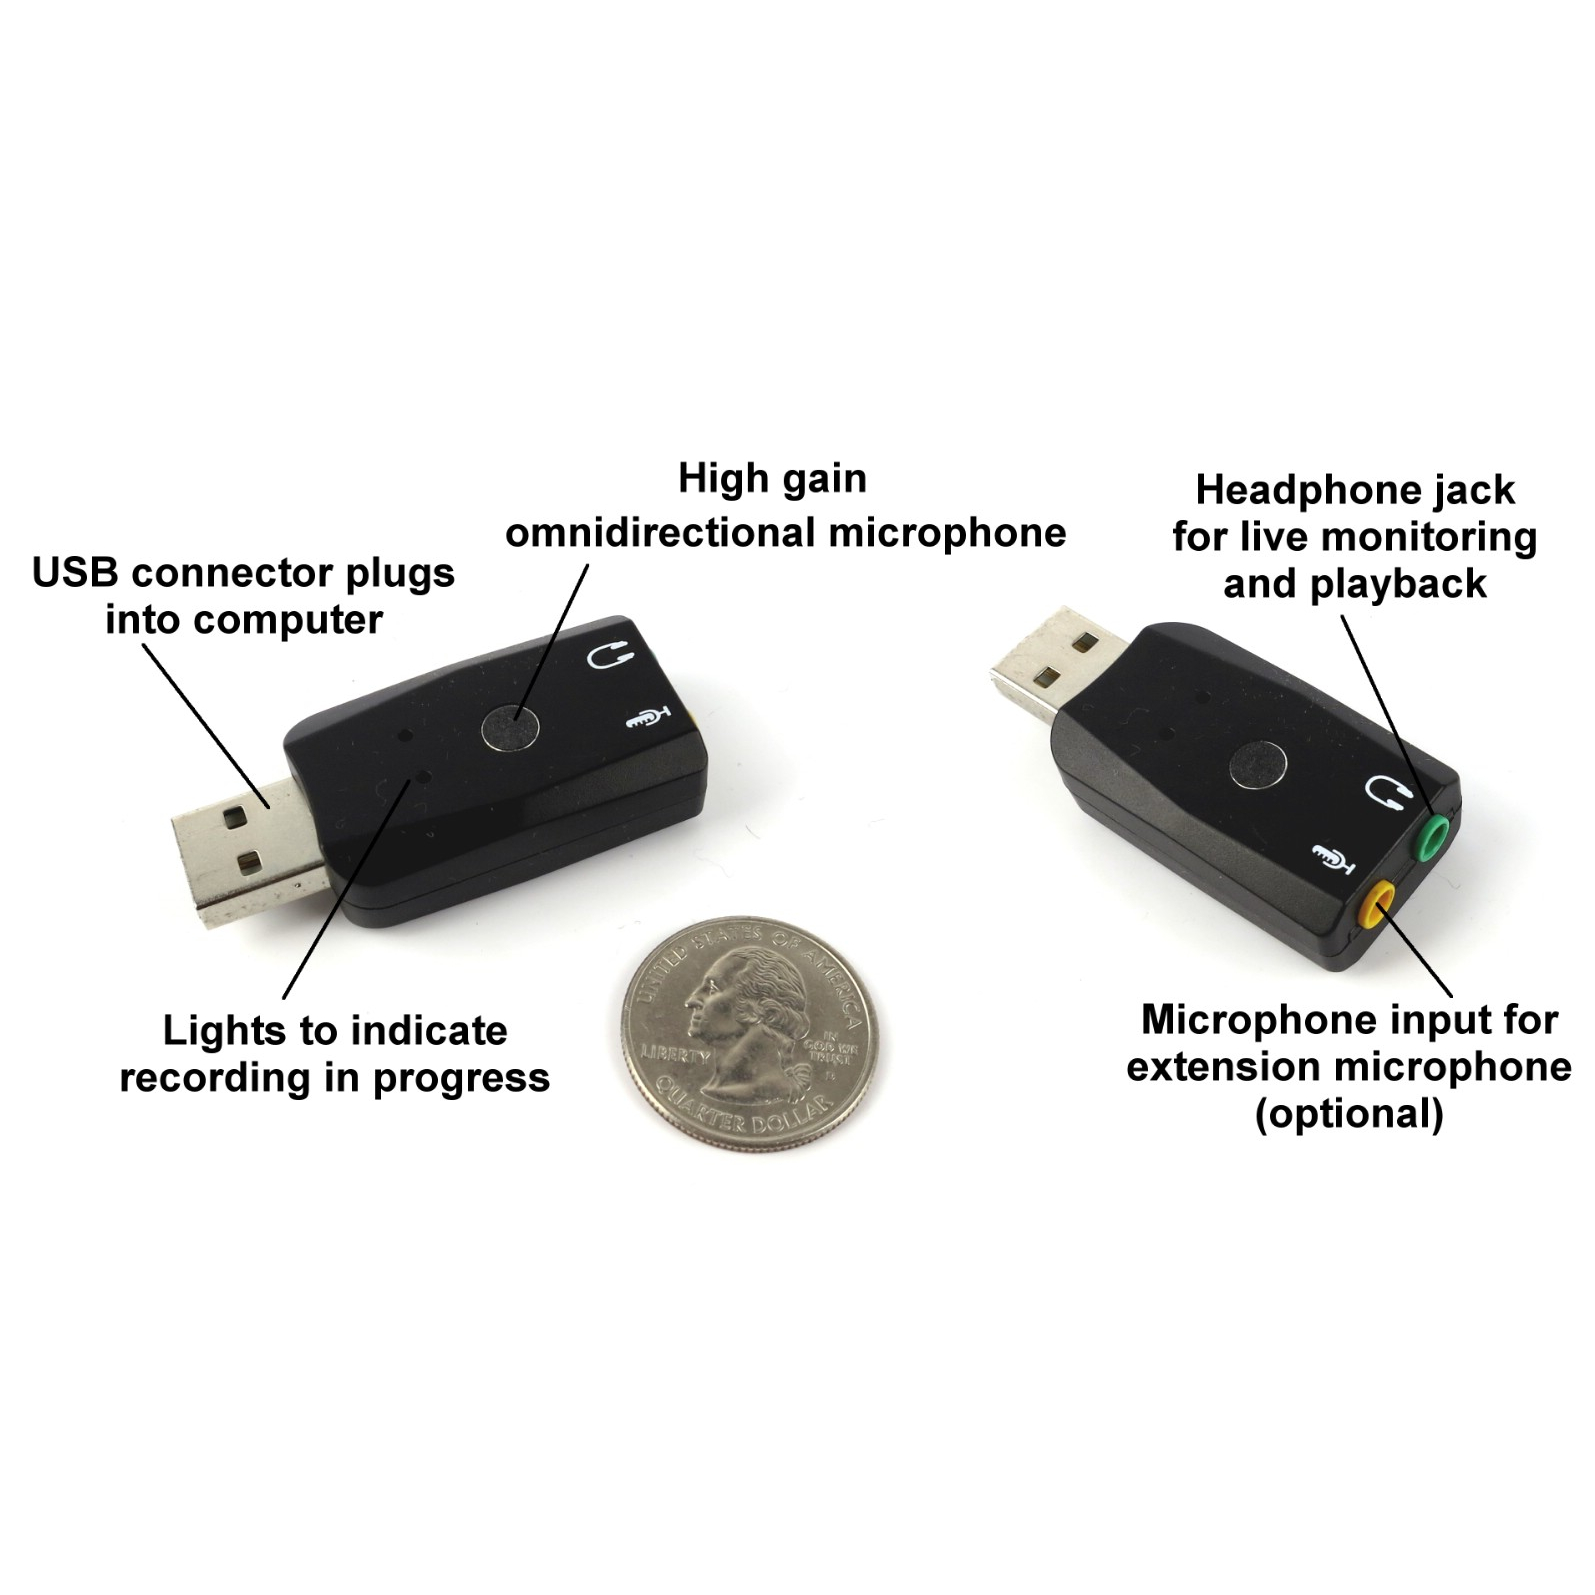 Miniature USB microphone for computers Questions & Answers